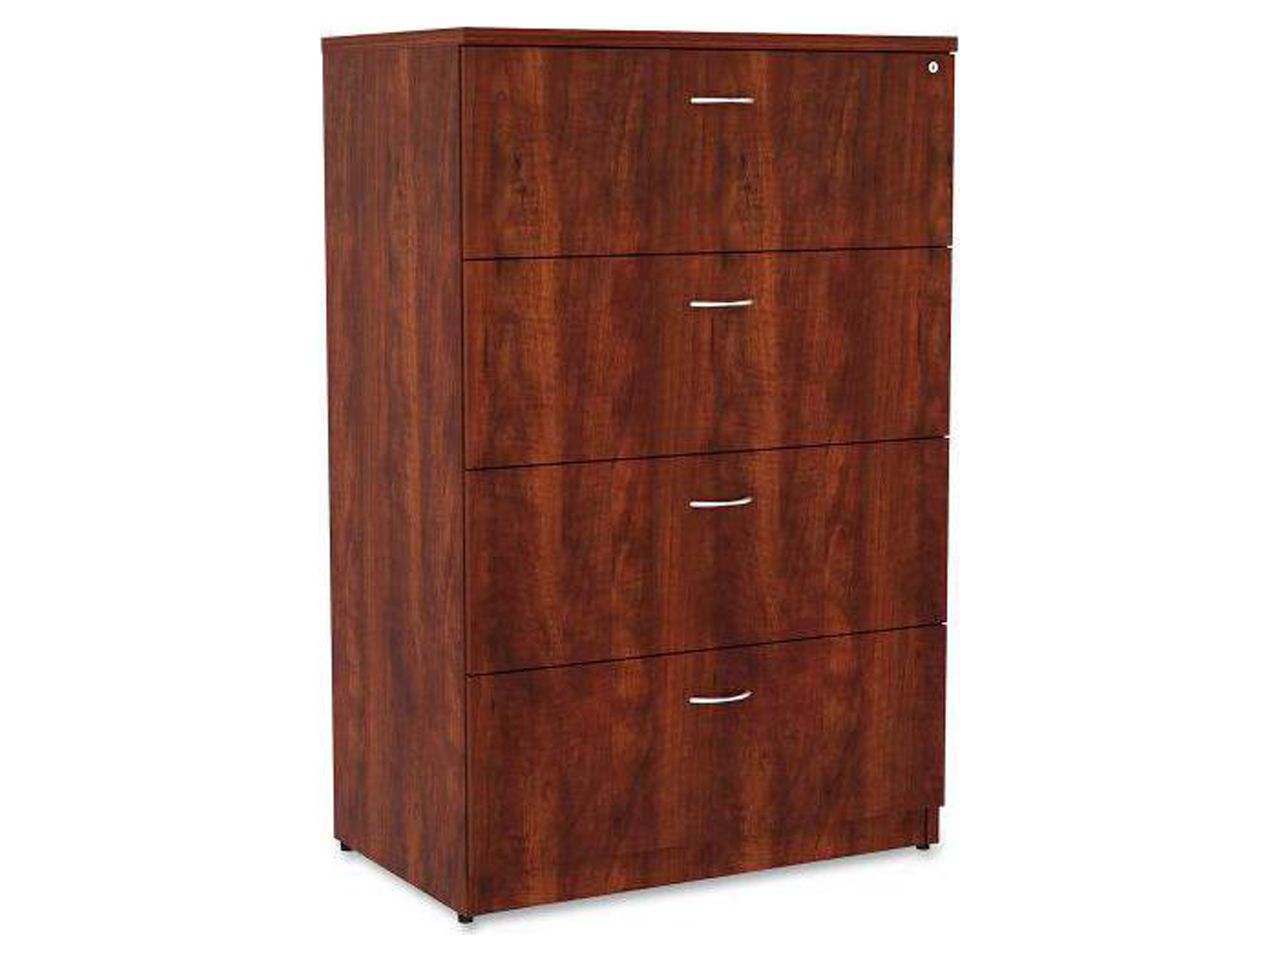 Lorell 4-Drawer Lateral File 35-1/2"x22"x54-3/4" Cherry 34387 - image 4 of 5